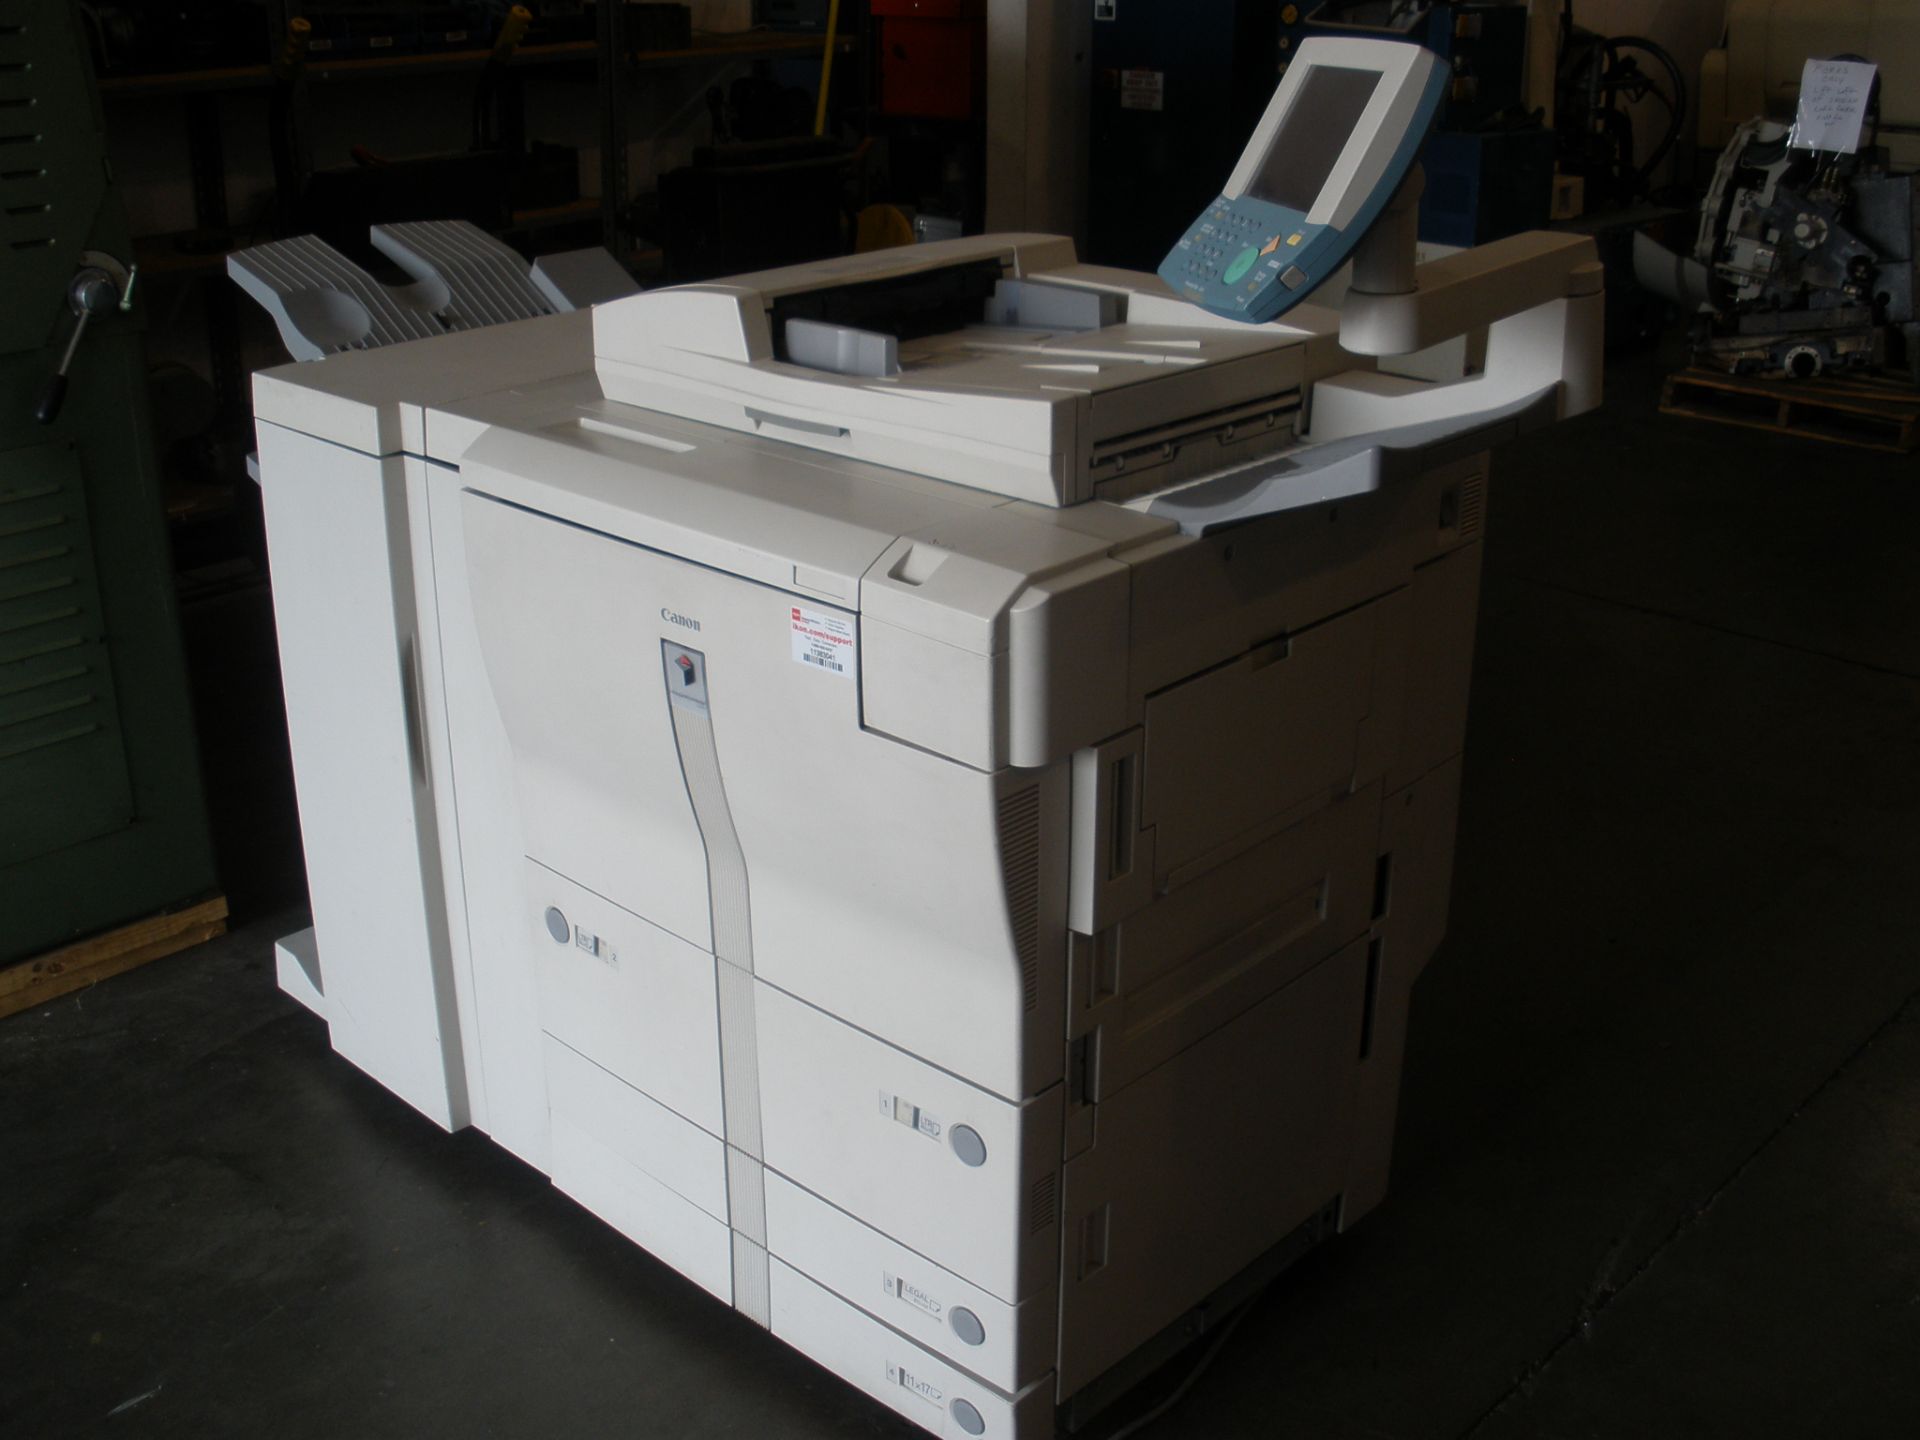 Cannon Image Runner Model 105 Copy Machine Counter 13299482 Copy’s W/Video - Image 2 of 12